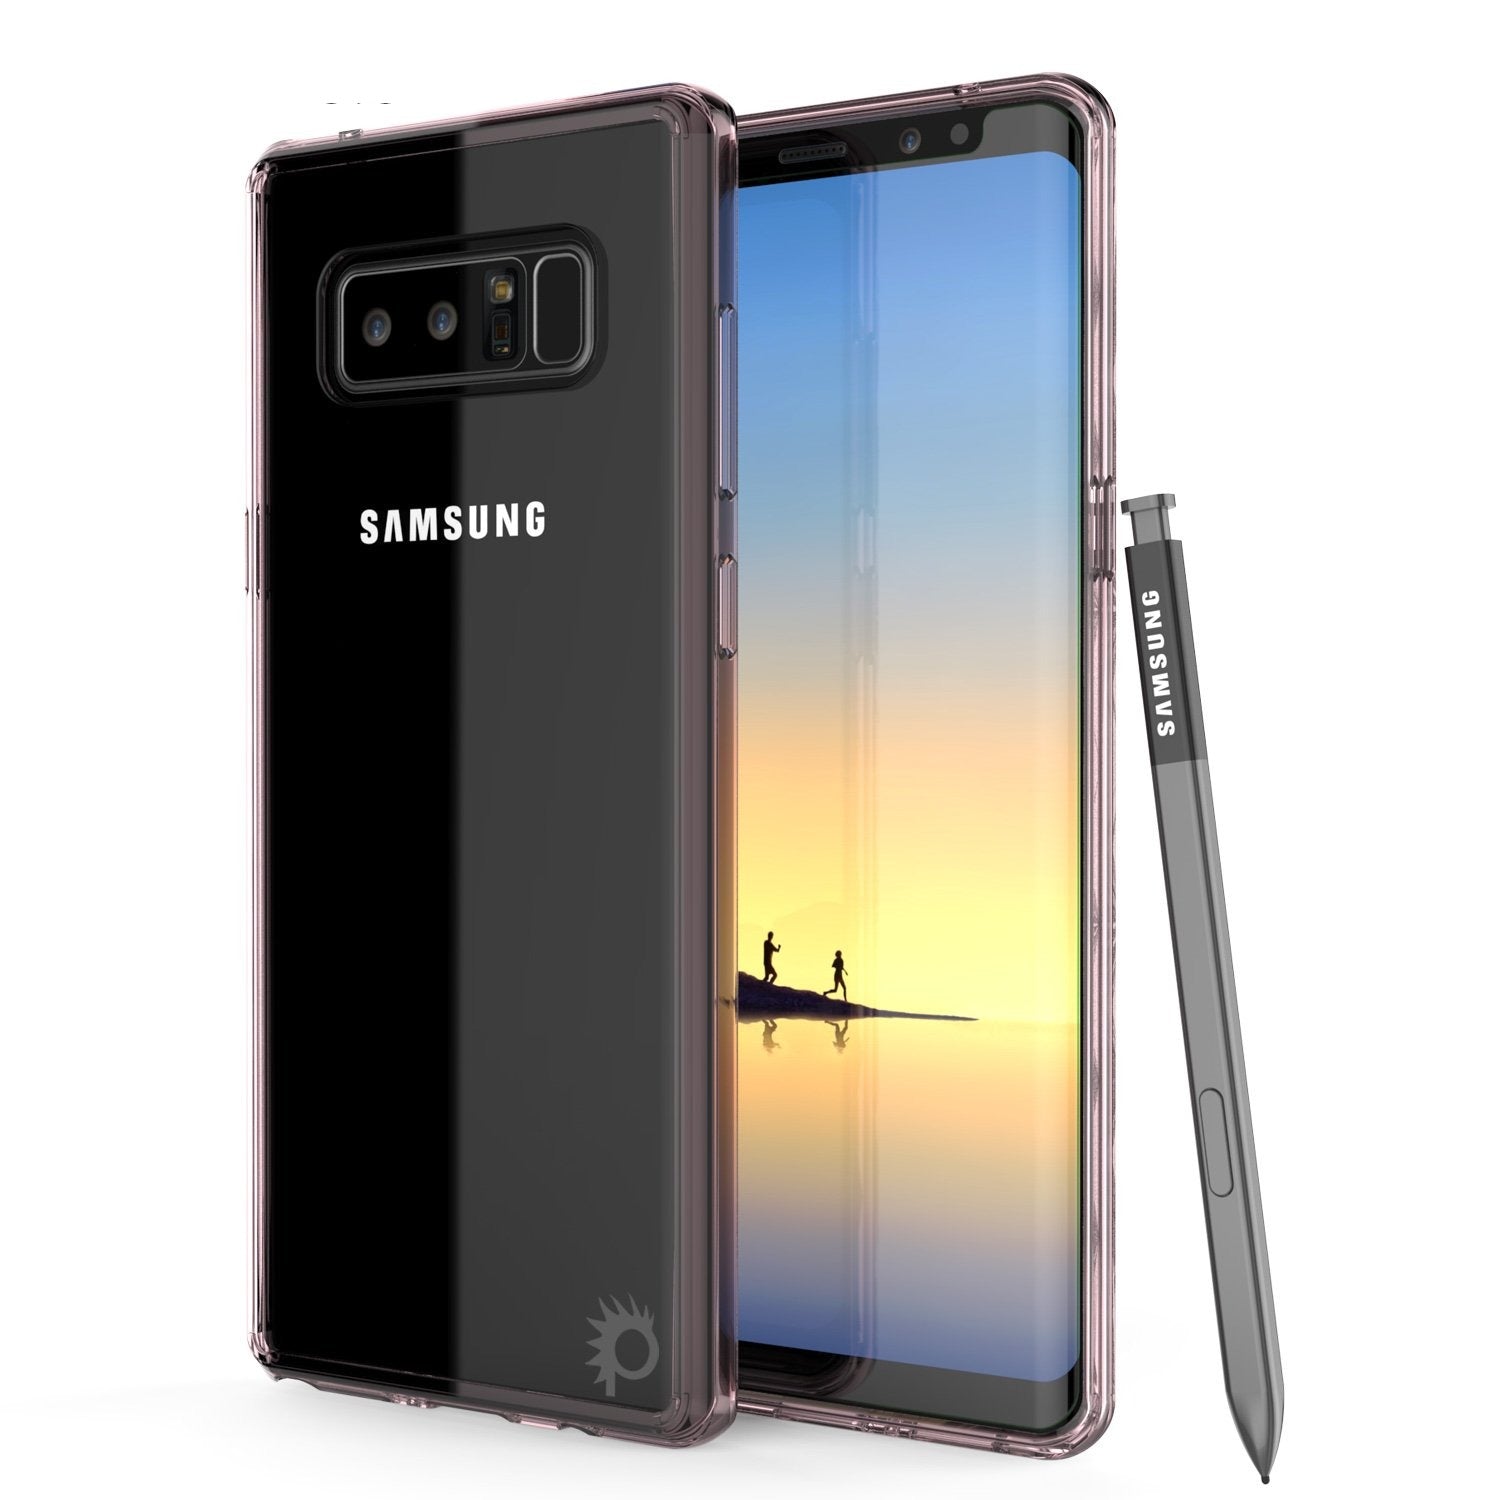 Galaxy Note 8 Case, PUNKcase [LUCID 2.0 Series] [Slim Fit] Armor Cover w/Integrated Anti-Shock System & Screen Protector [Crystal Pink] (Color in image: Crystal Pink)